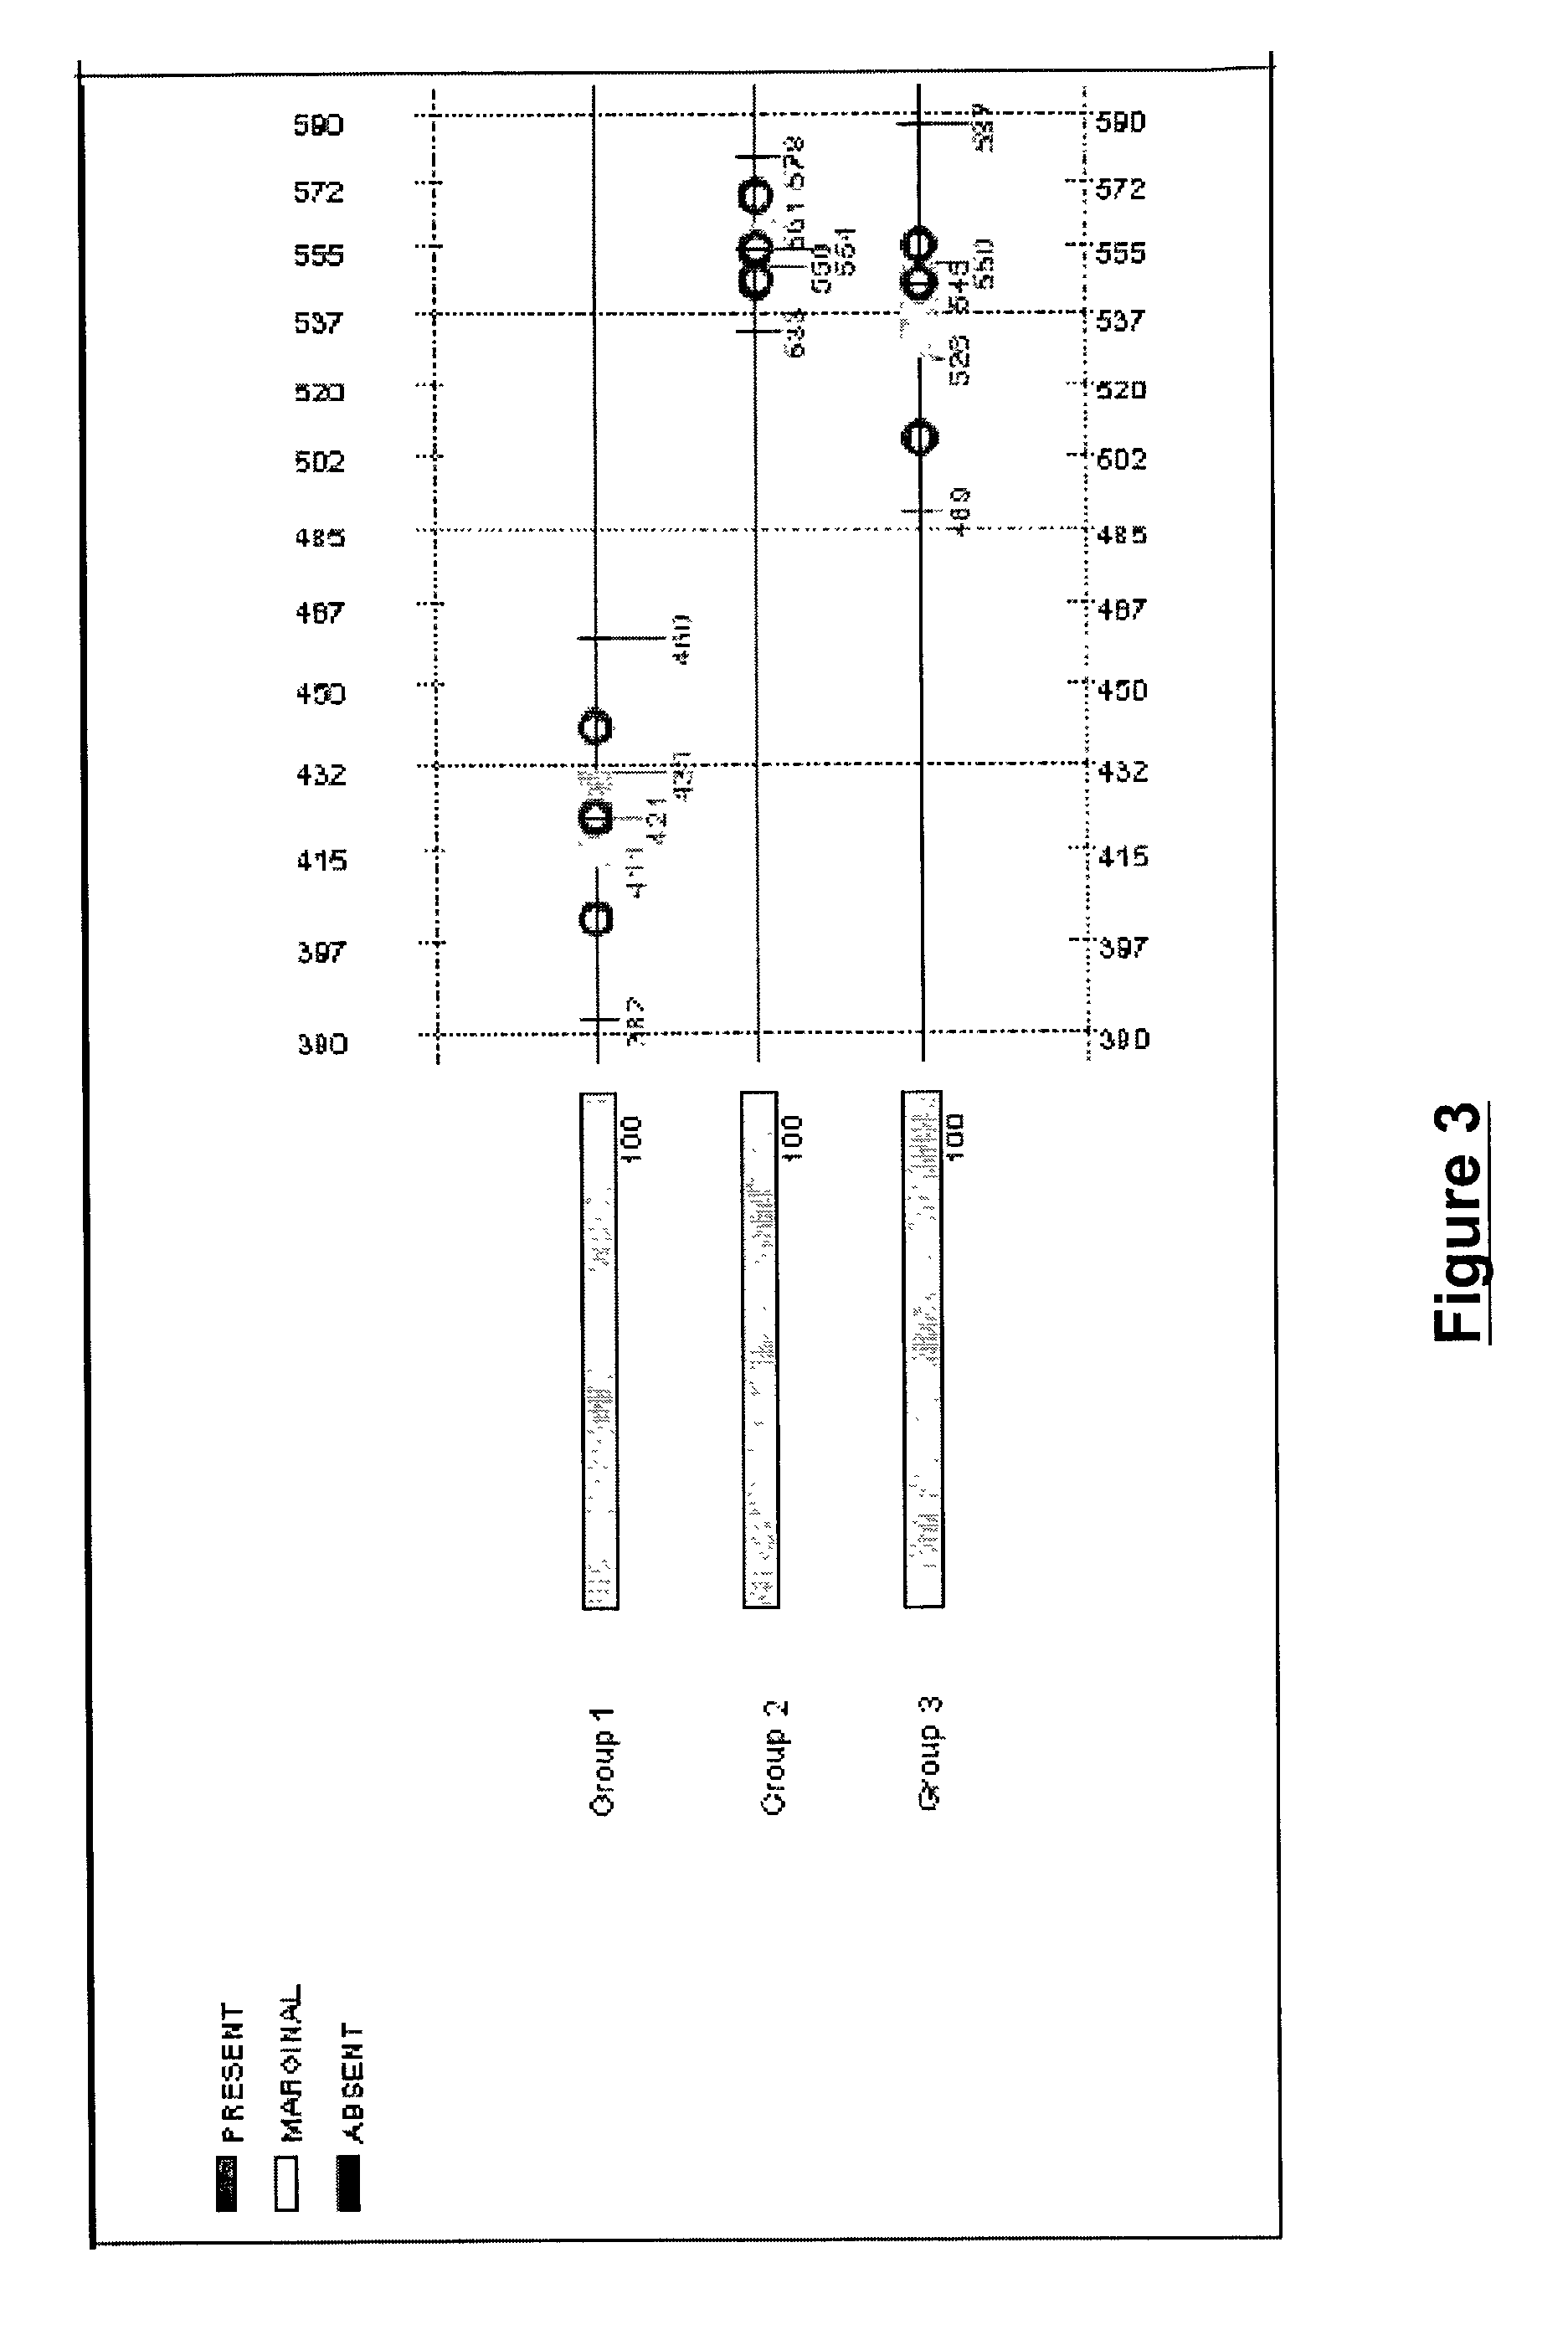 Methods and systems for efficient comparison, identification, processing, and importing of gene expression data